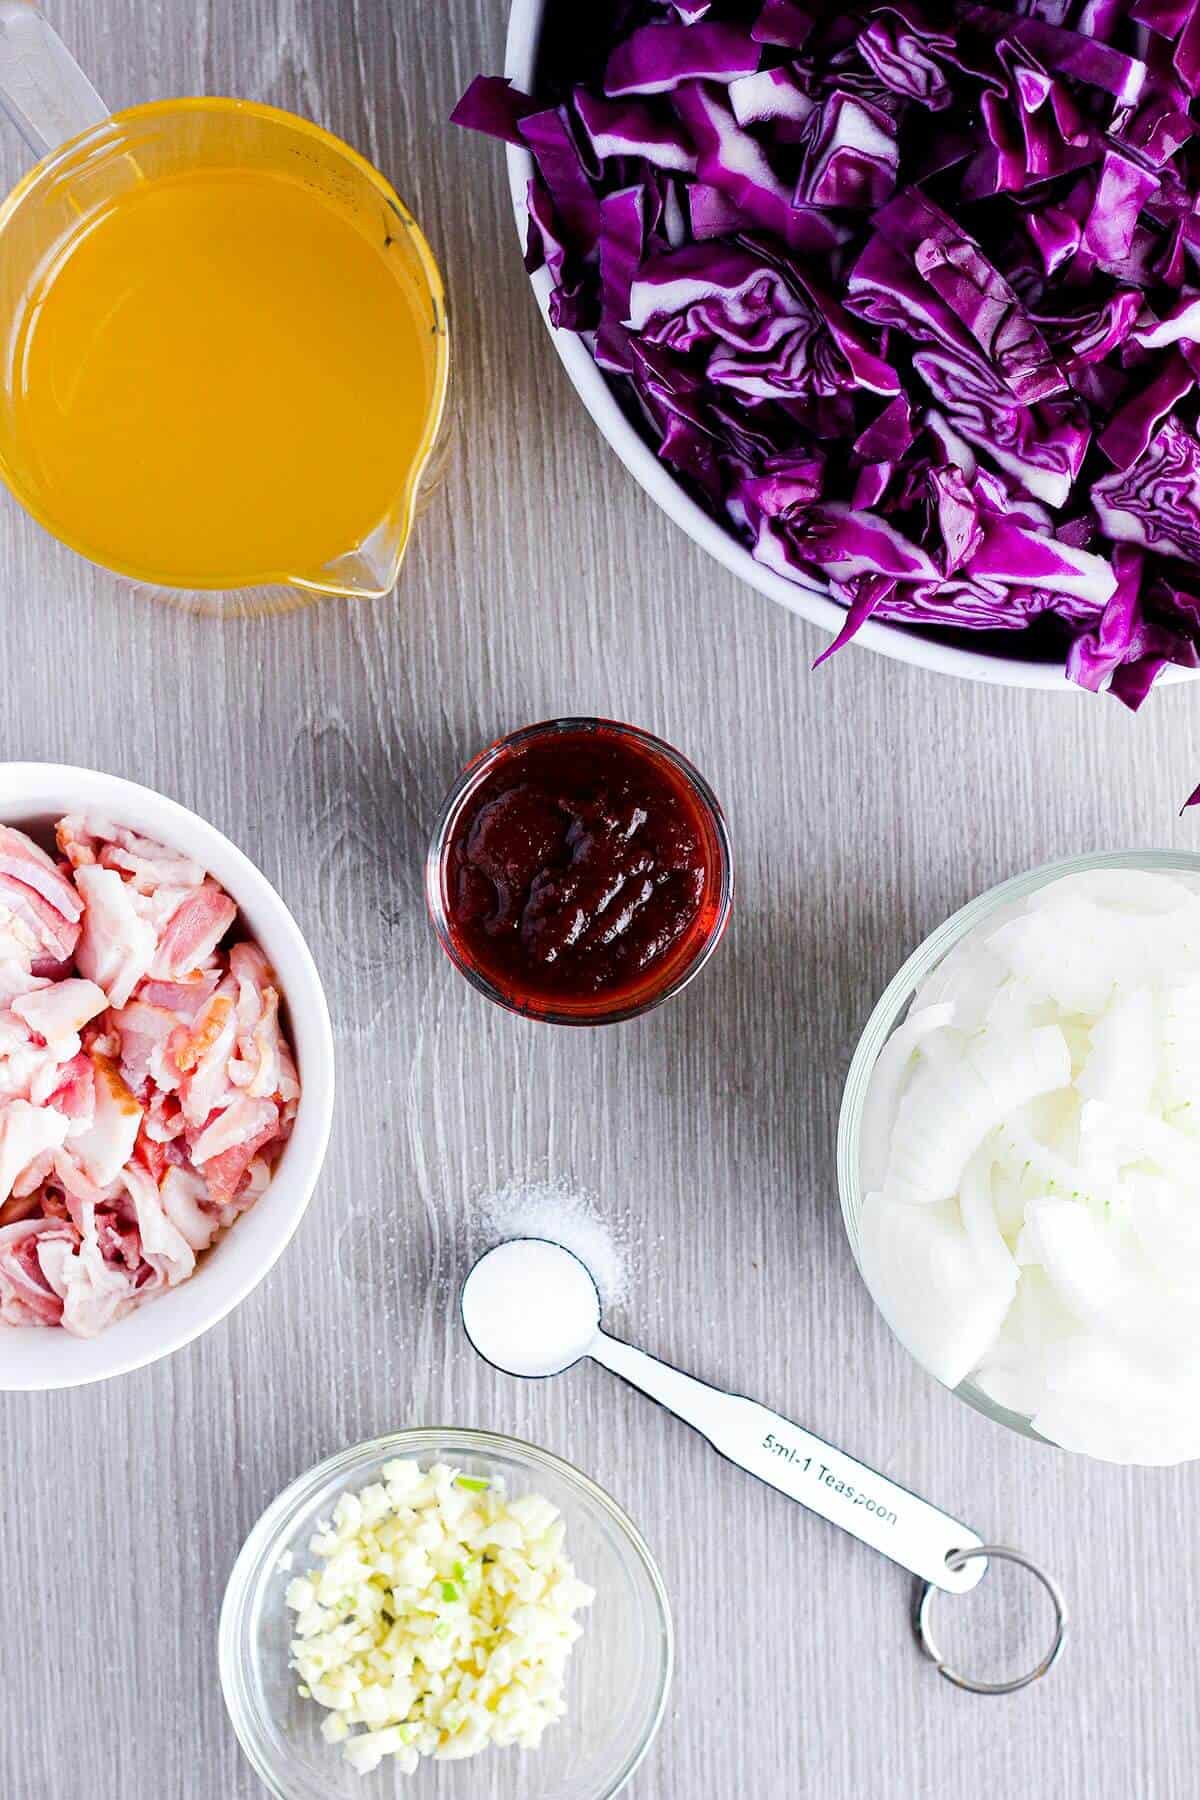 Ingredients for bbq braised cabbage with bacon (see recipe card).